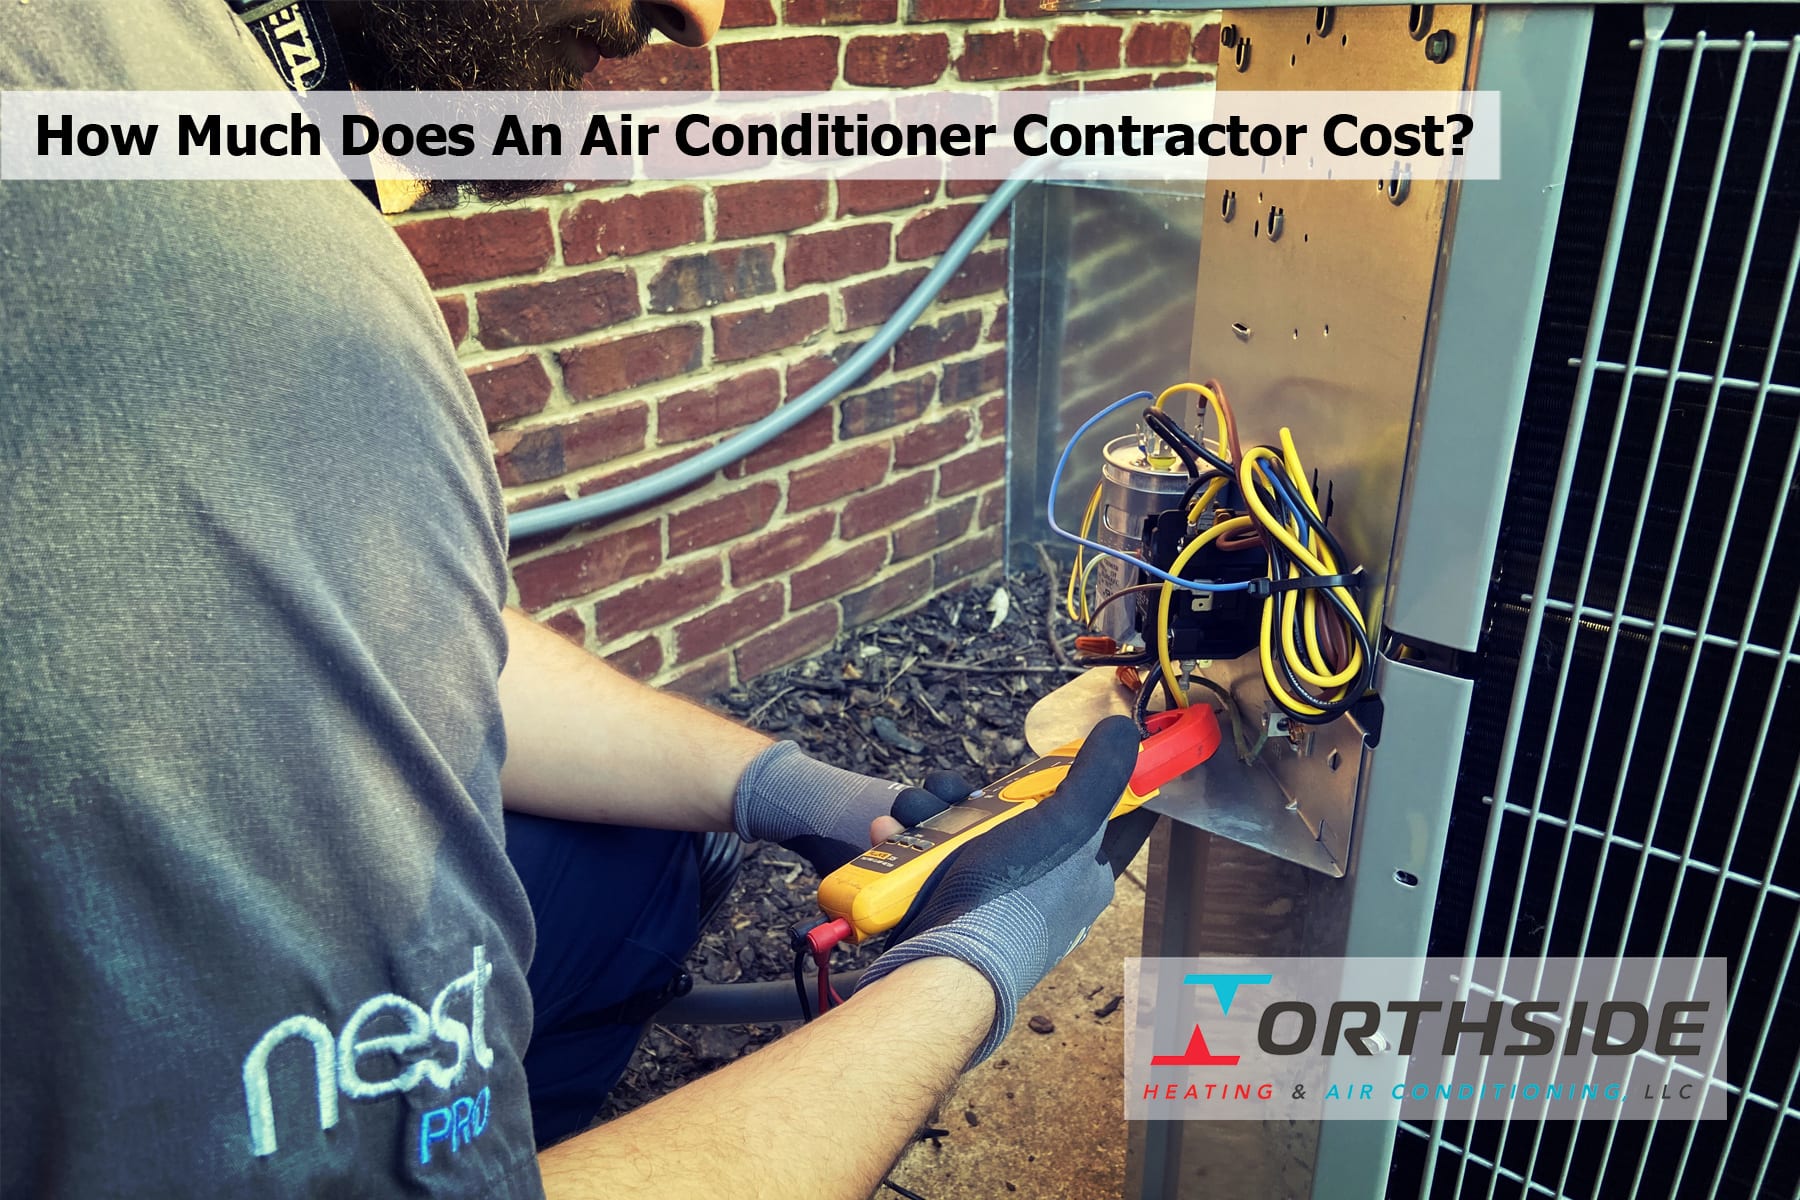 How Much Does An Air Conditioner Contractor Cost?